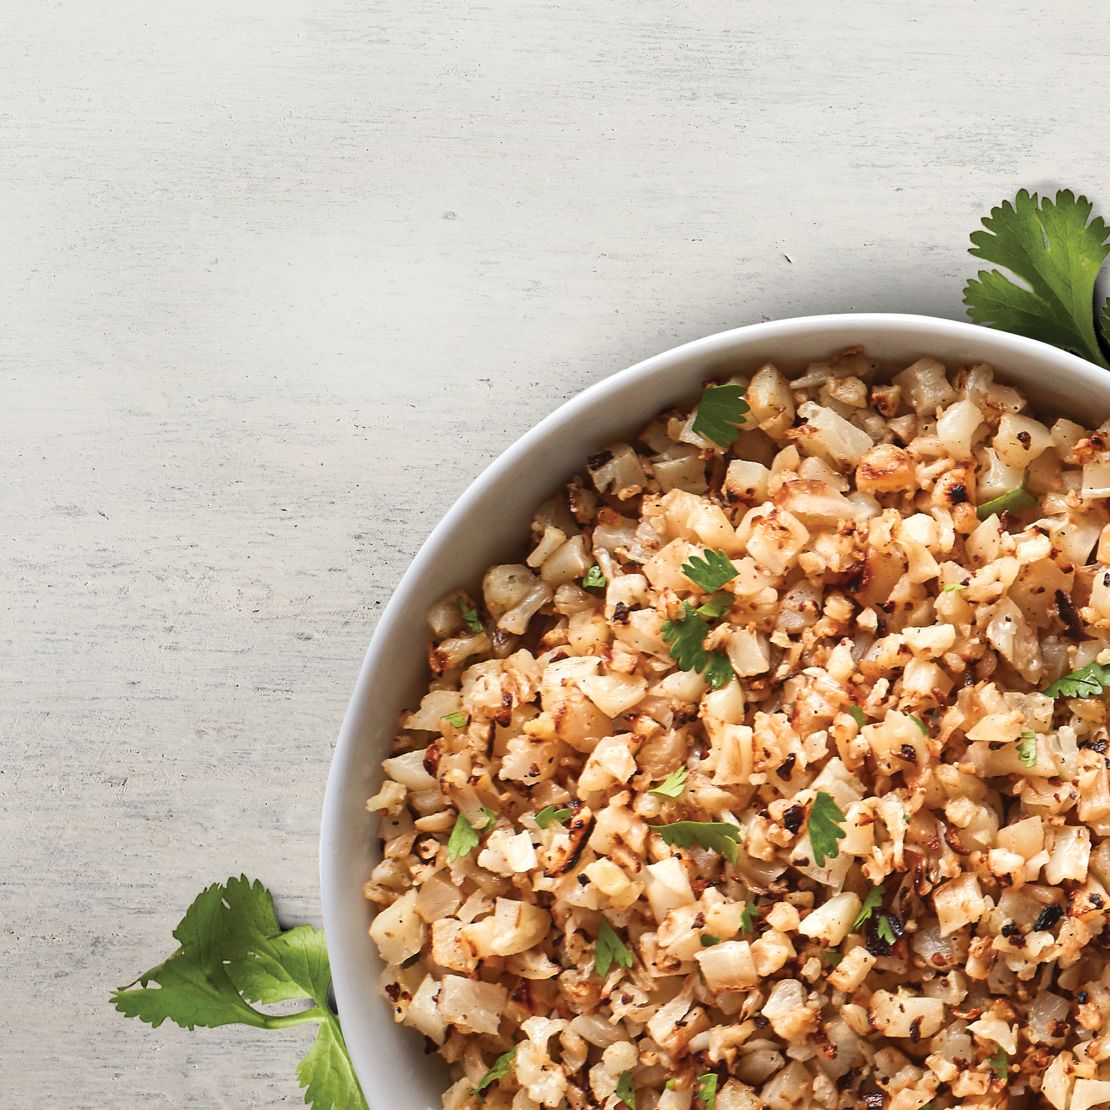 Chipotle's new cauiflower rice will be available in 55 US retaurants.